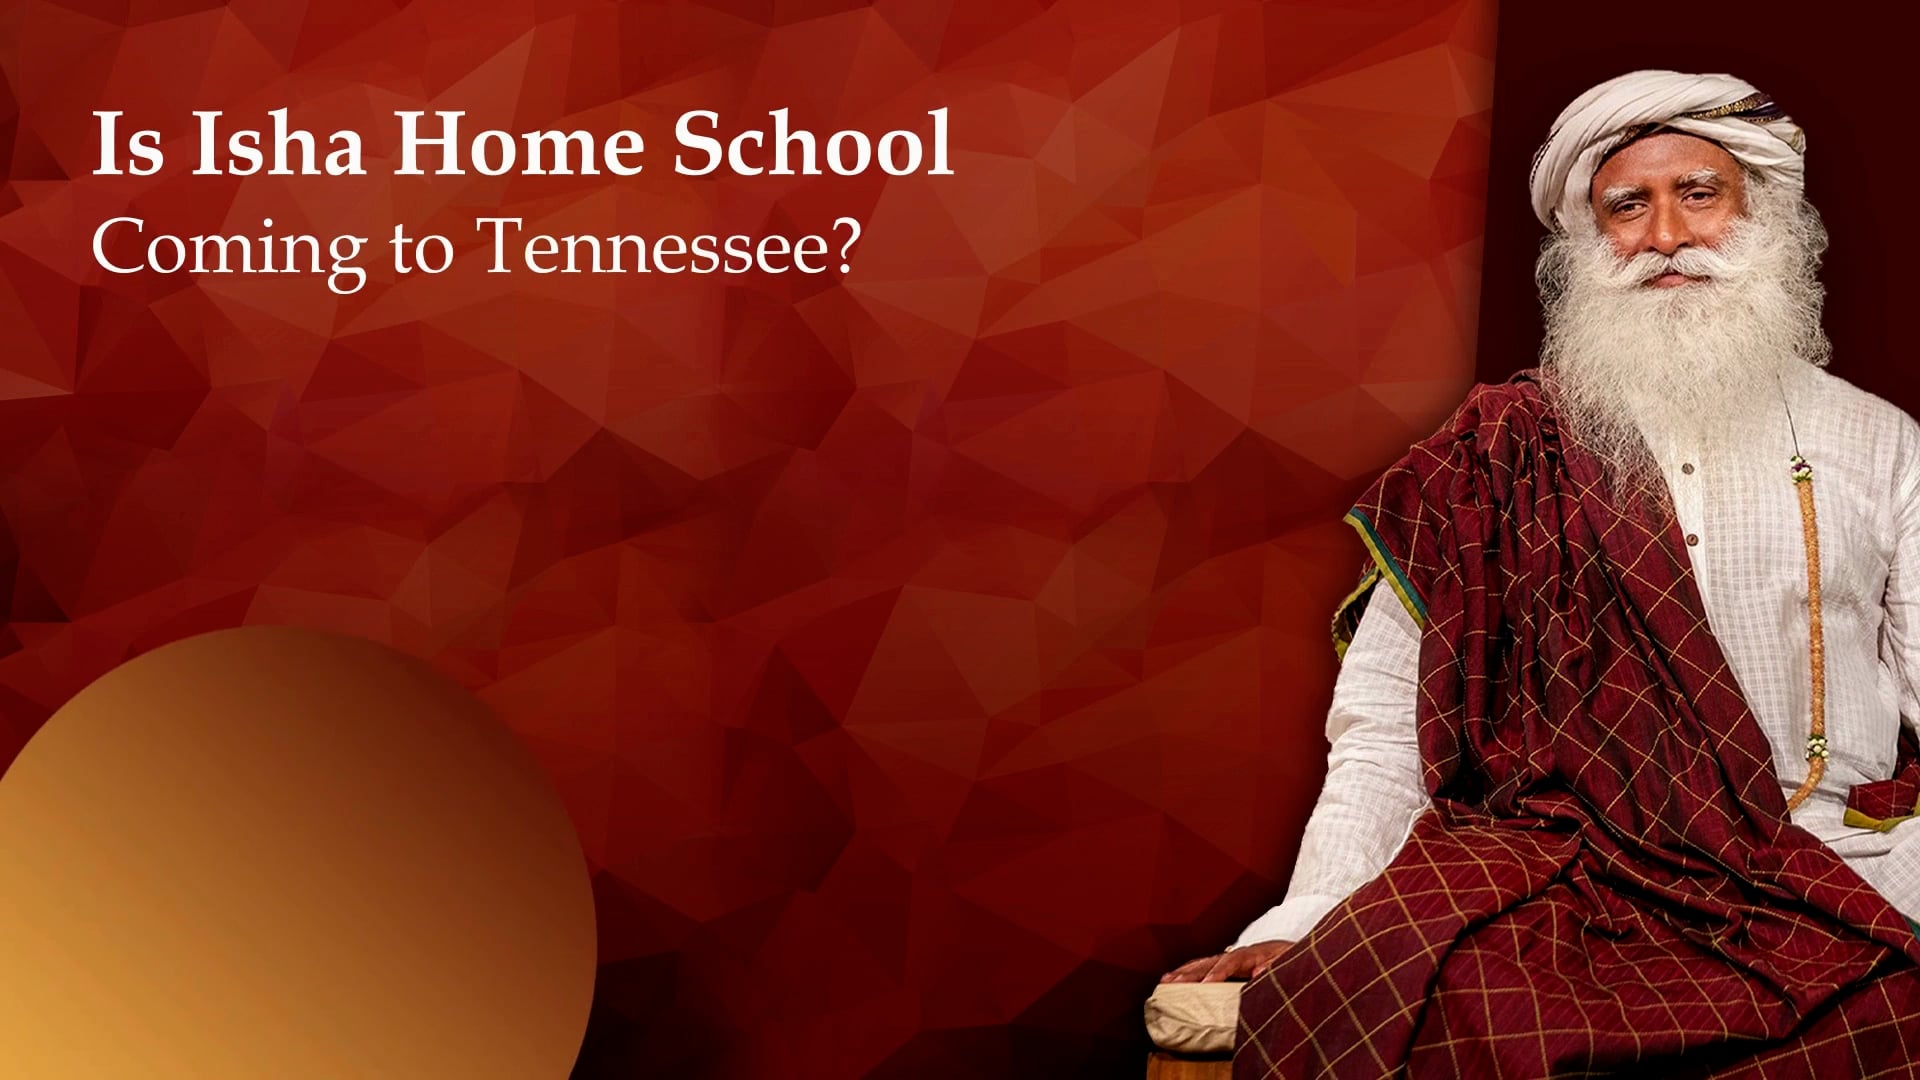 Is Isha Home School coming to Tennessee?